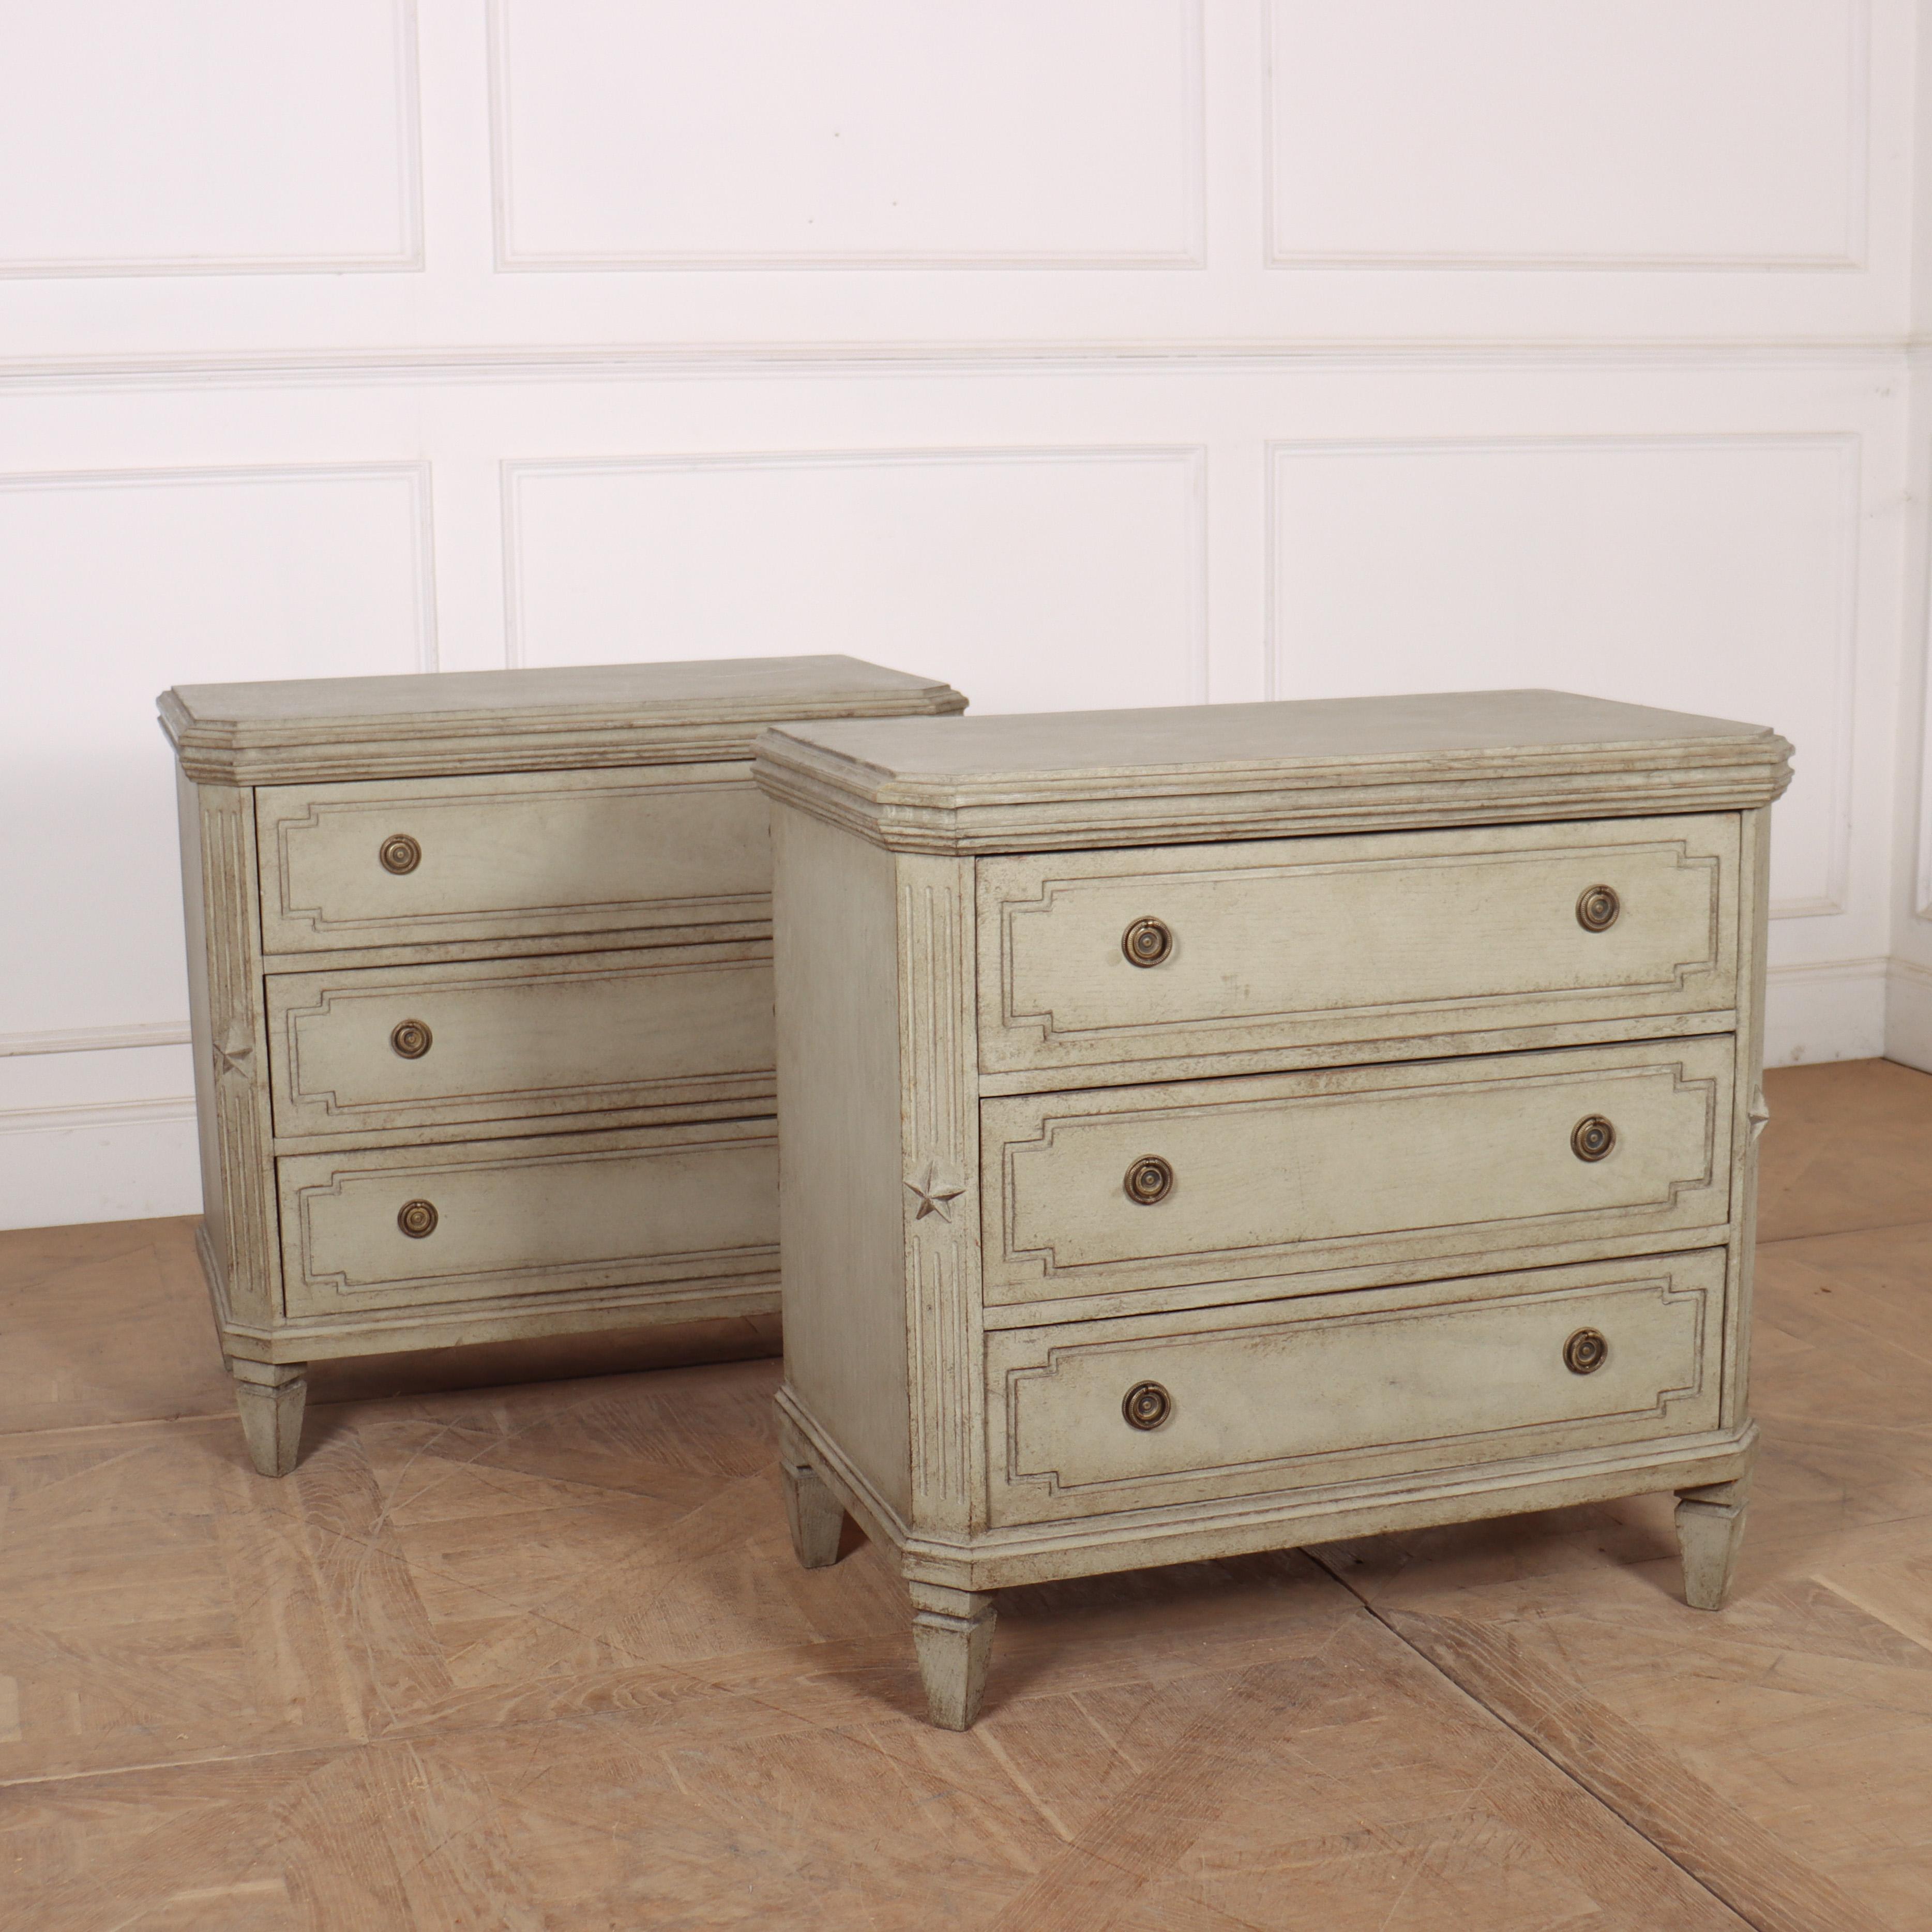 Nice pair of 19th C Swedish painted commodes. 1880.

Internal reference: JG4

Reference: 8054

Dimensions
33 inches (84 cms) Wide
19 inches (48 cms) Deep
32 inches (81 cms) High